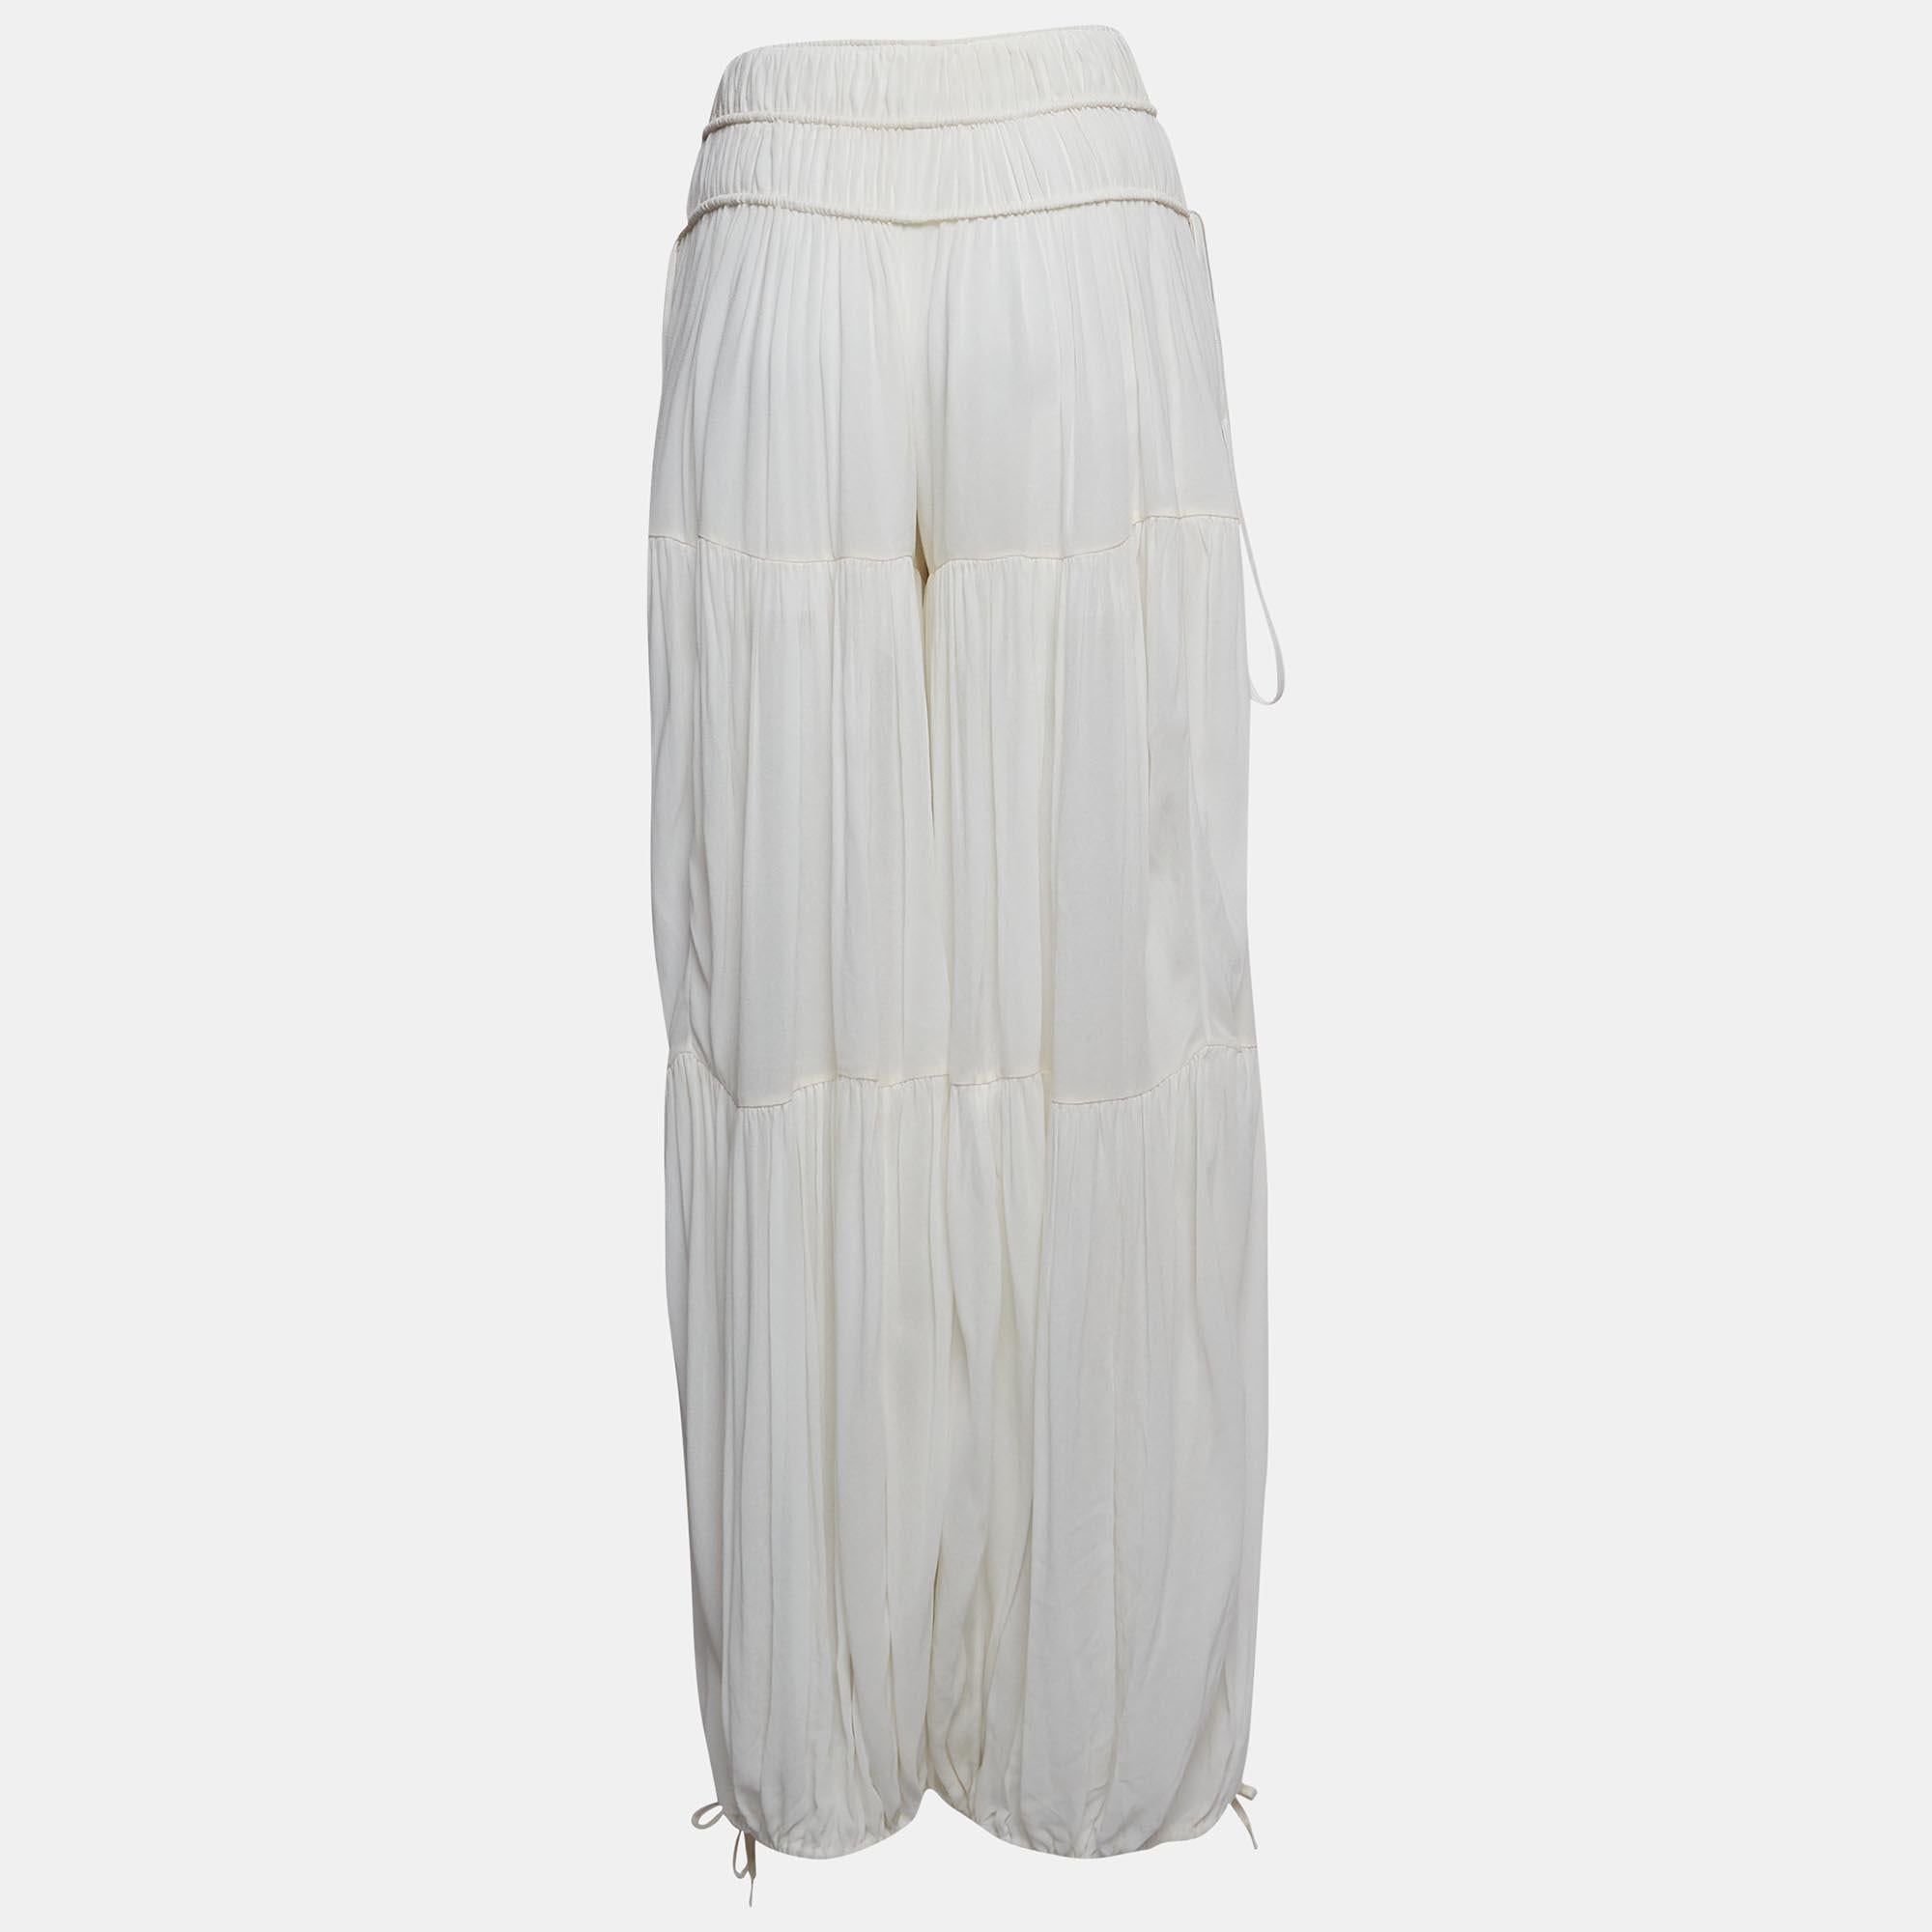 Tailored with finesse, the Chloé harem pants exude effortless charm. Delicately designed from sheer crepe fabric, they boast gathered detailing for a touch of whimsy. Embrace comfort and style with their relaxed harem silhouette, perfect for both